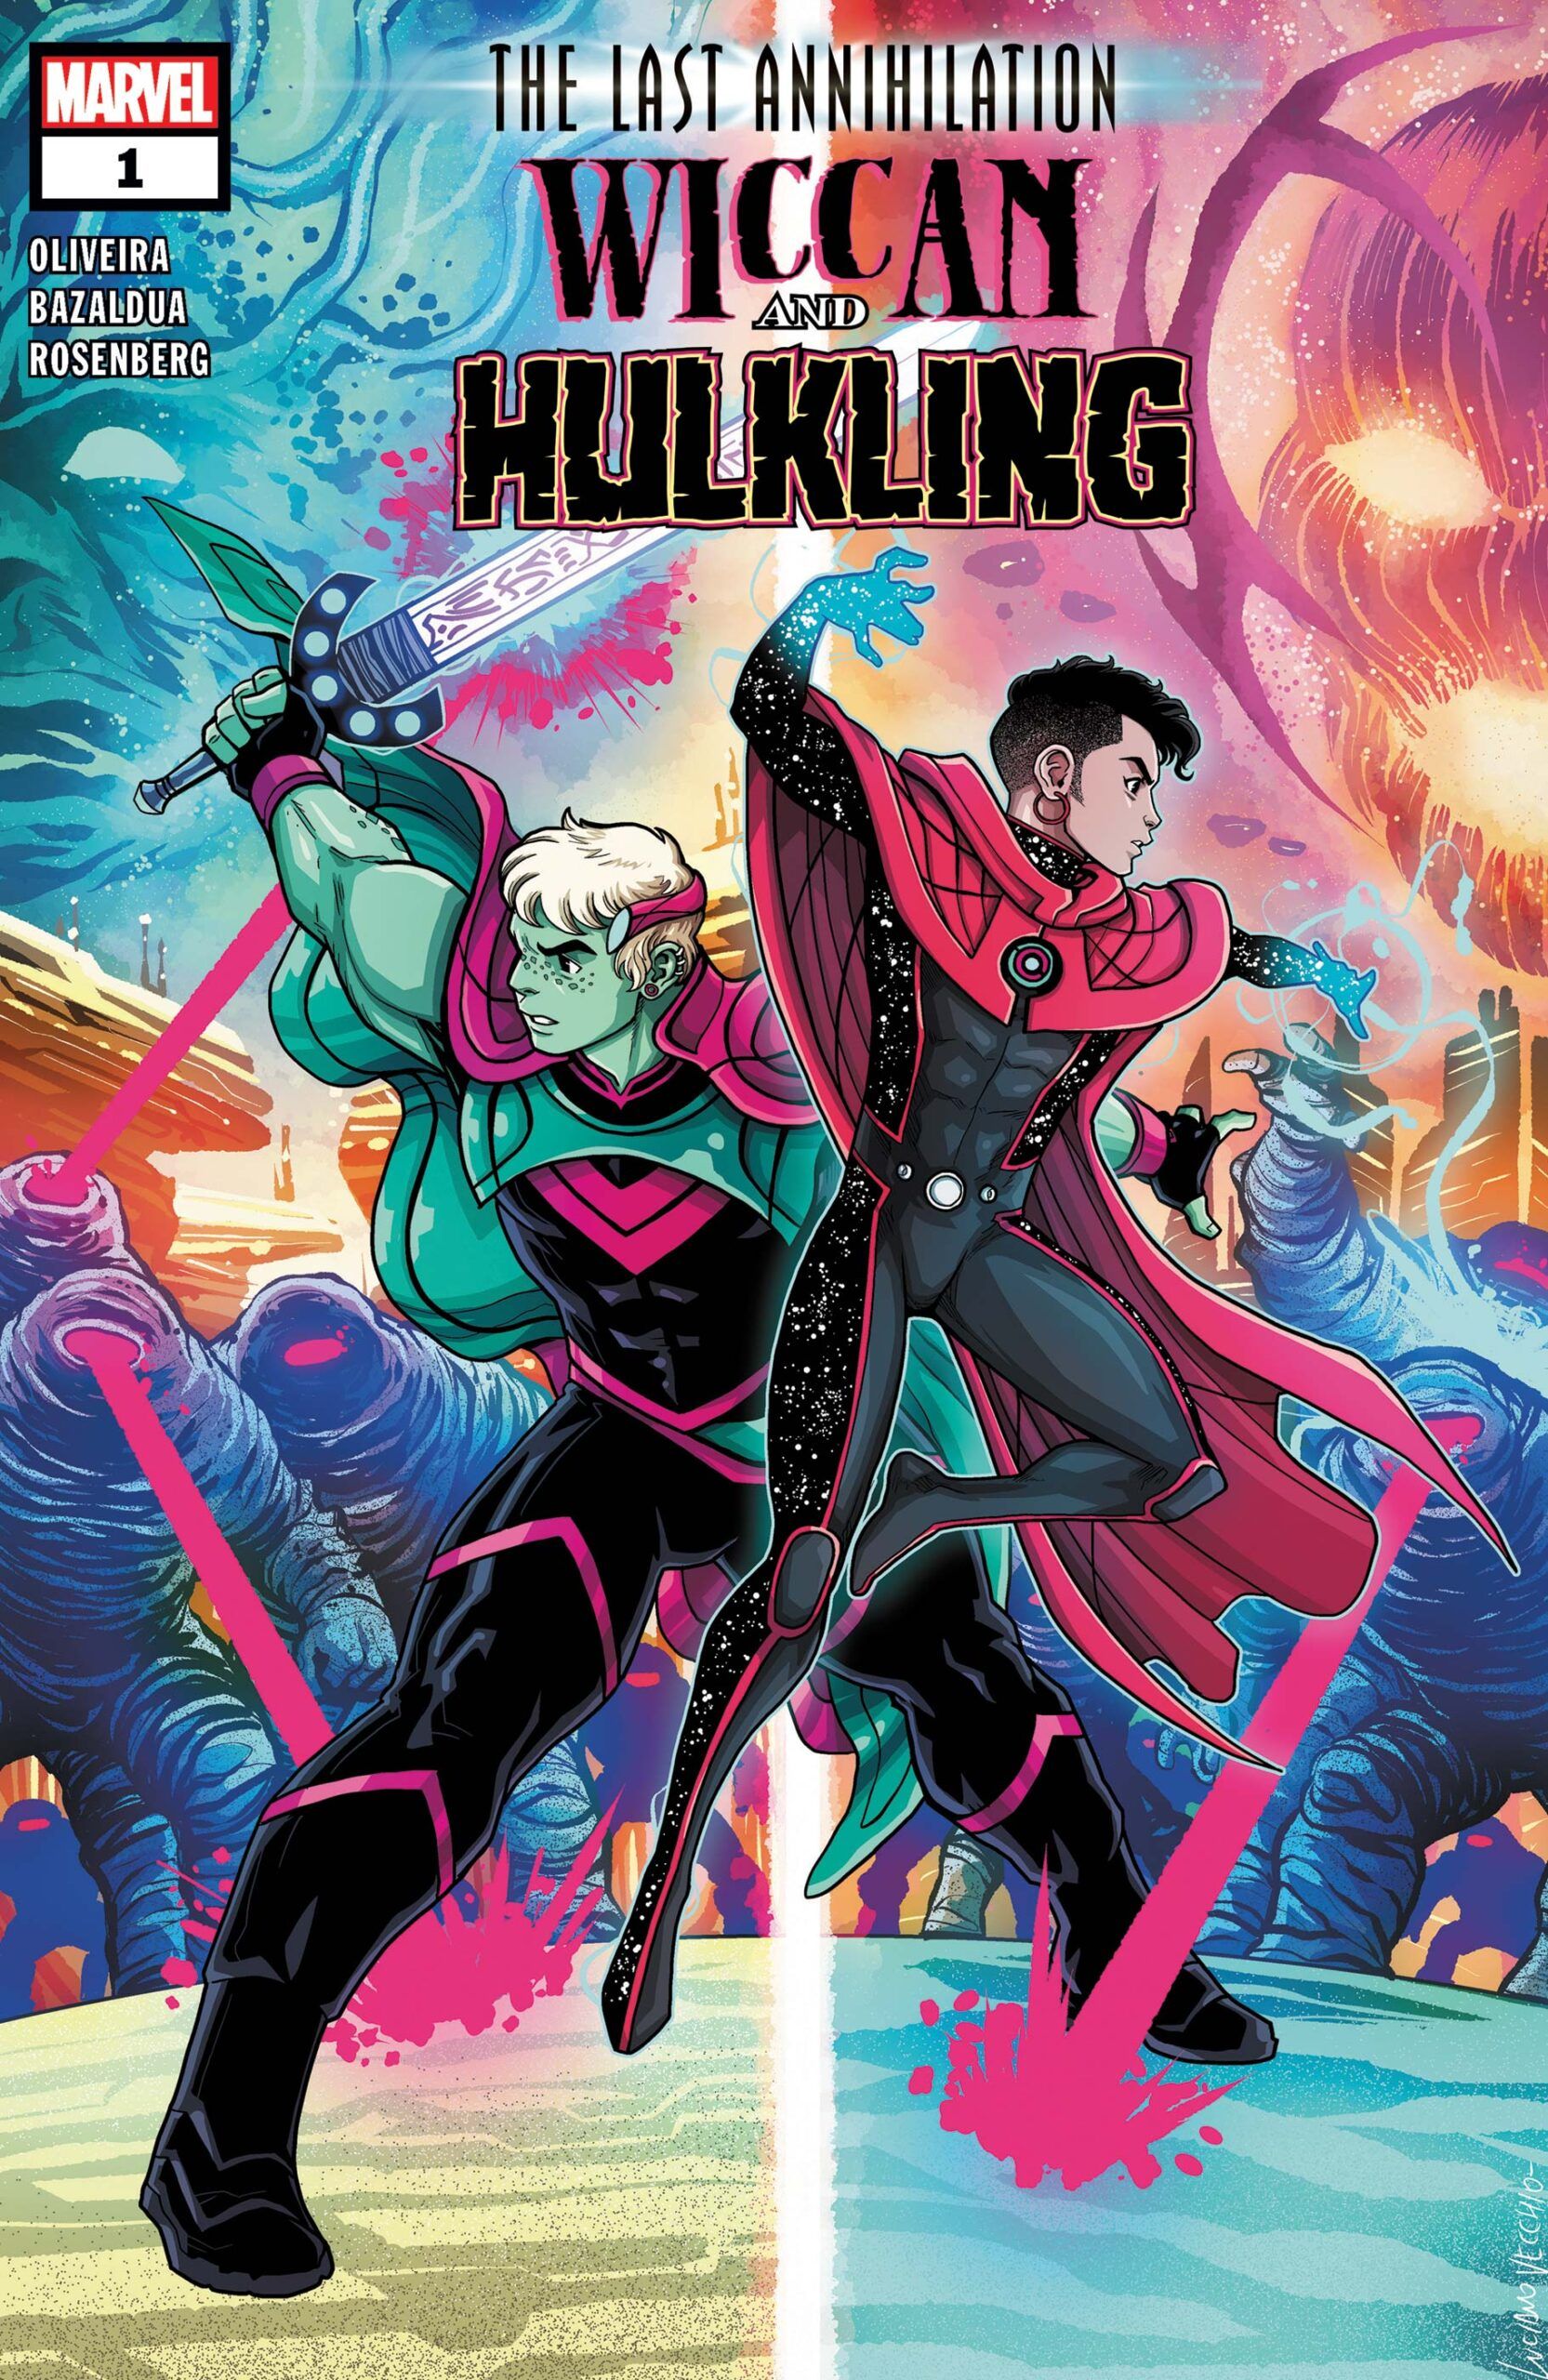 cover of Hulkling and Wiccan